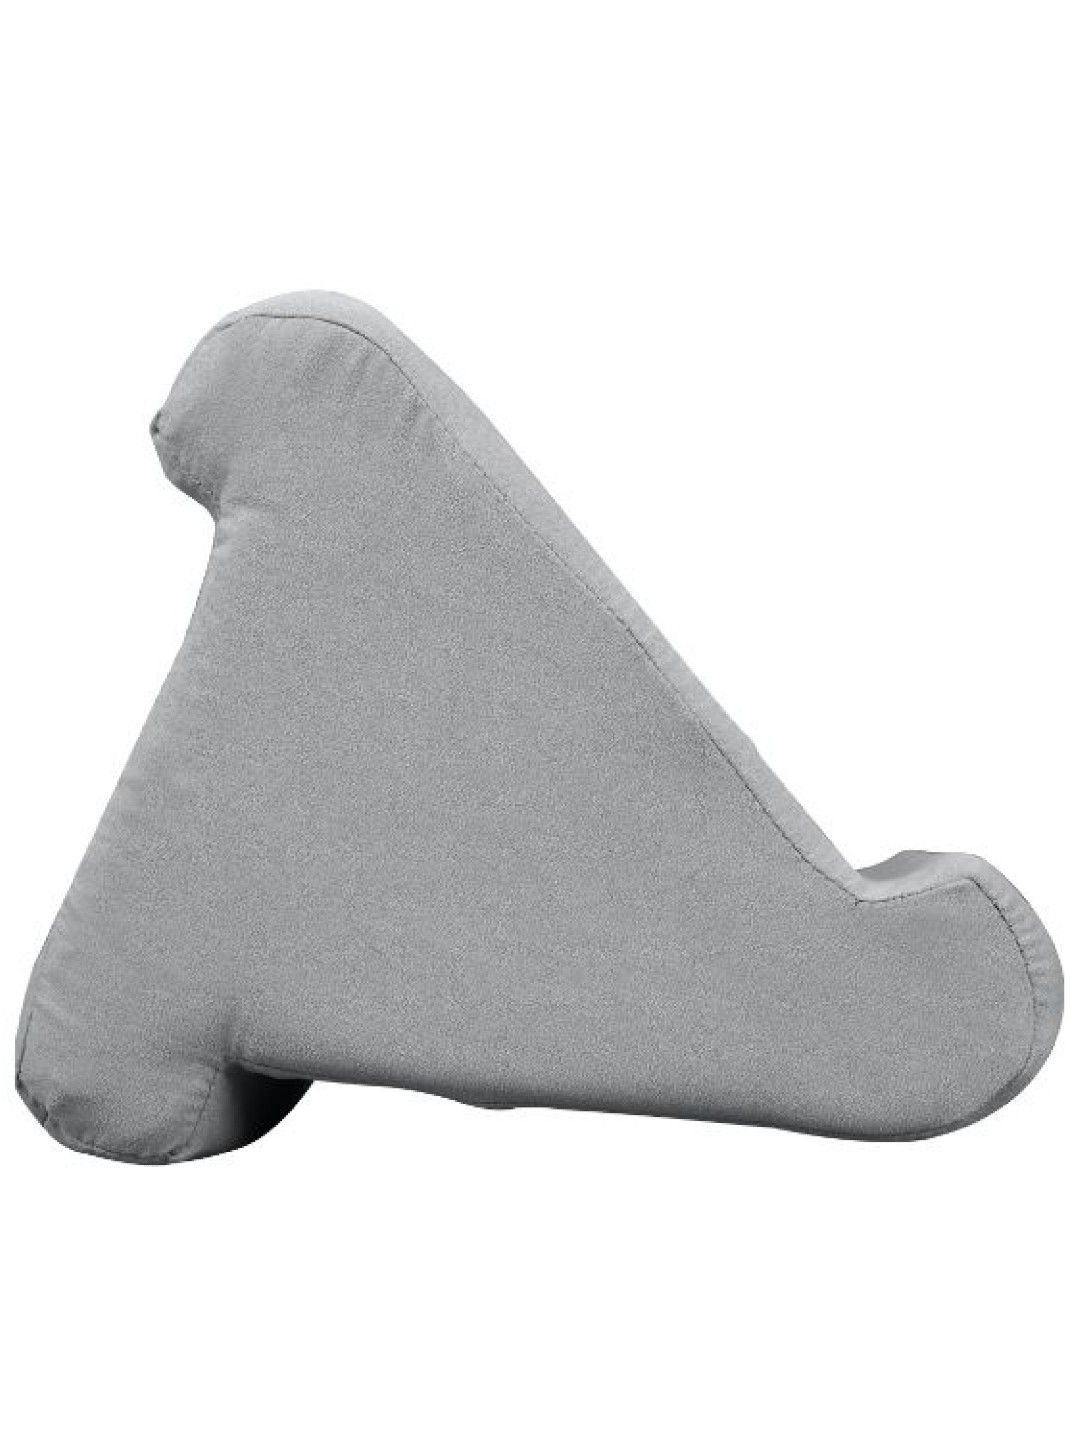 Sunbeams Lifestyle Gray Label Premium Tablet Pillow Stand (No Color- Image 4)